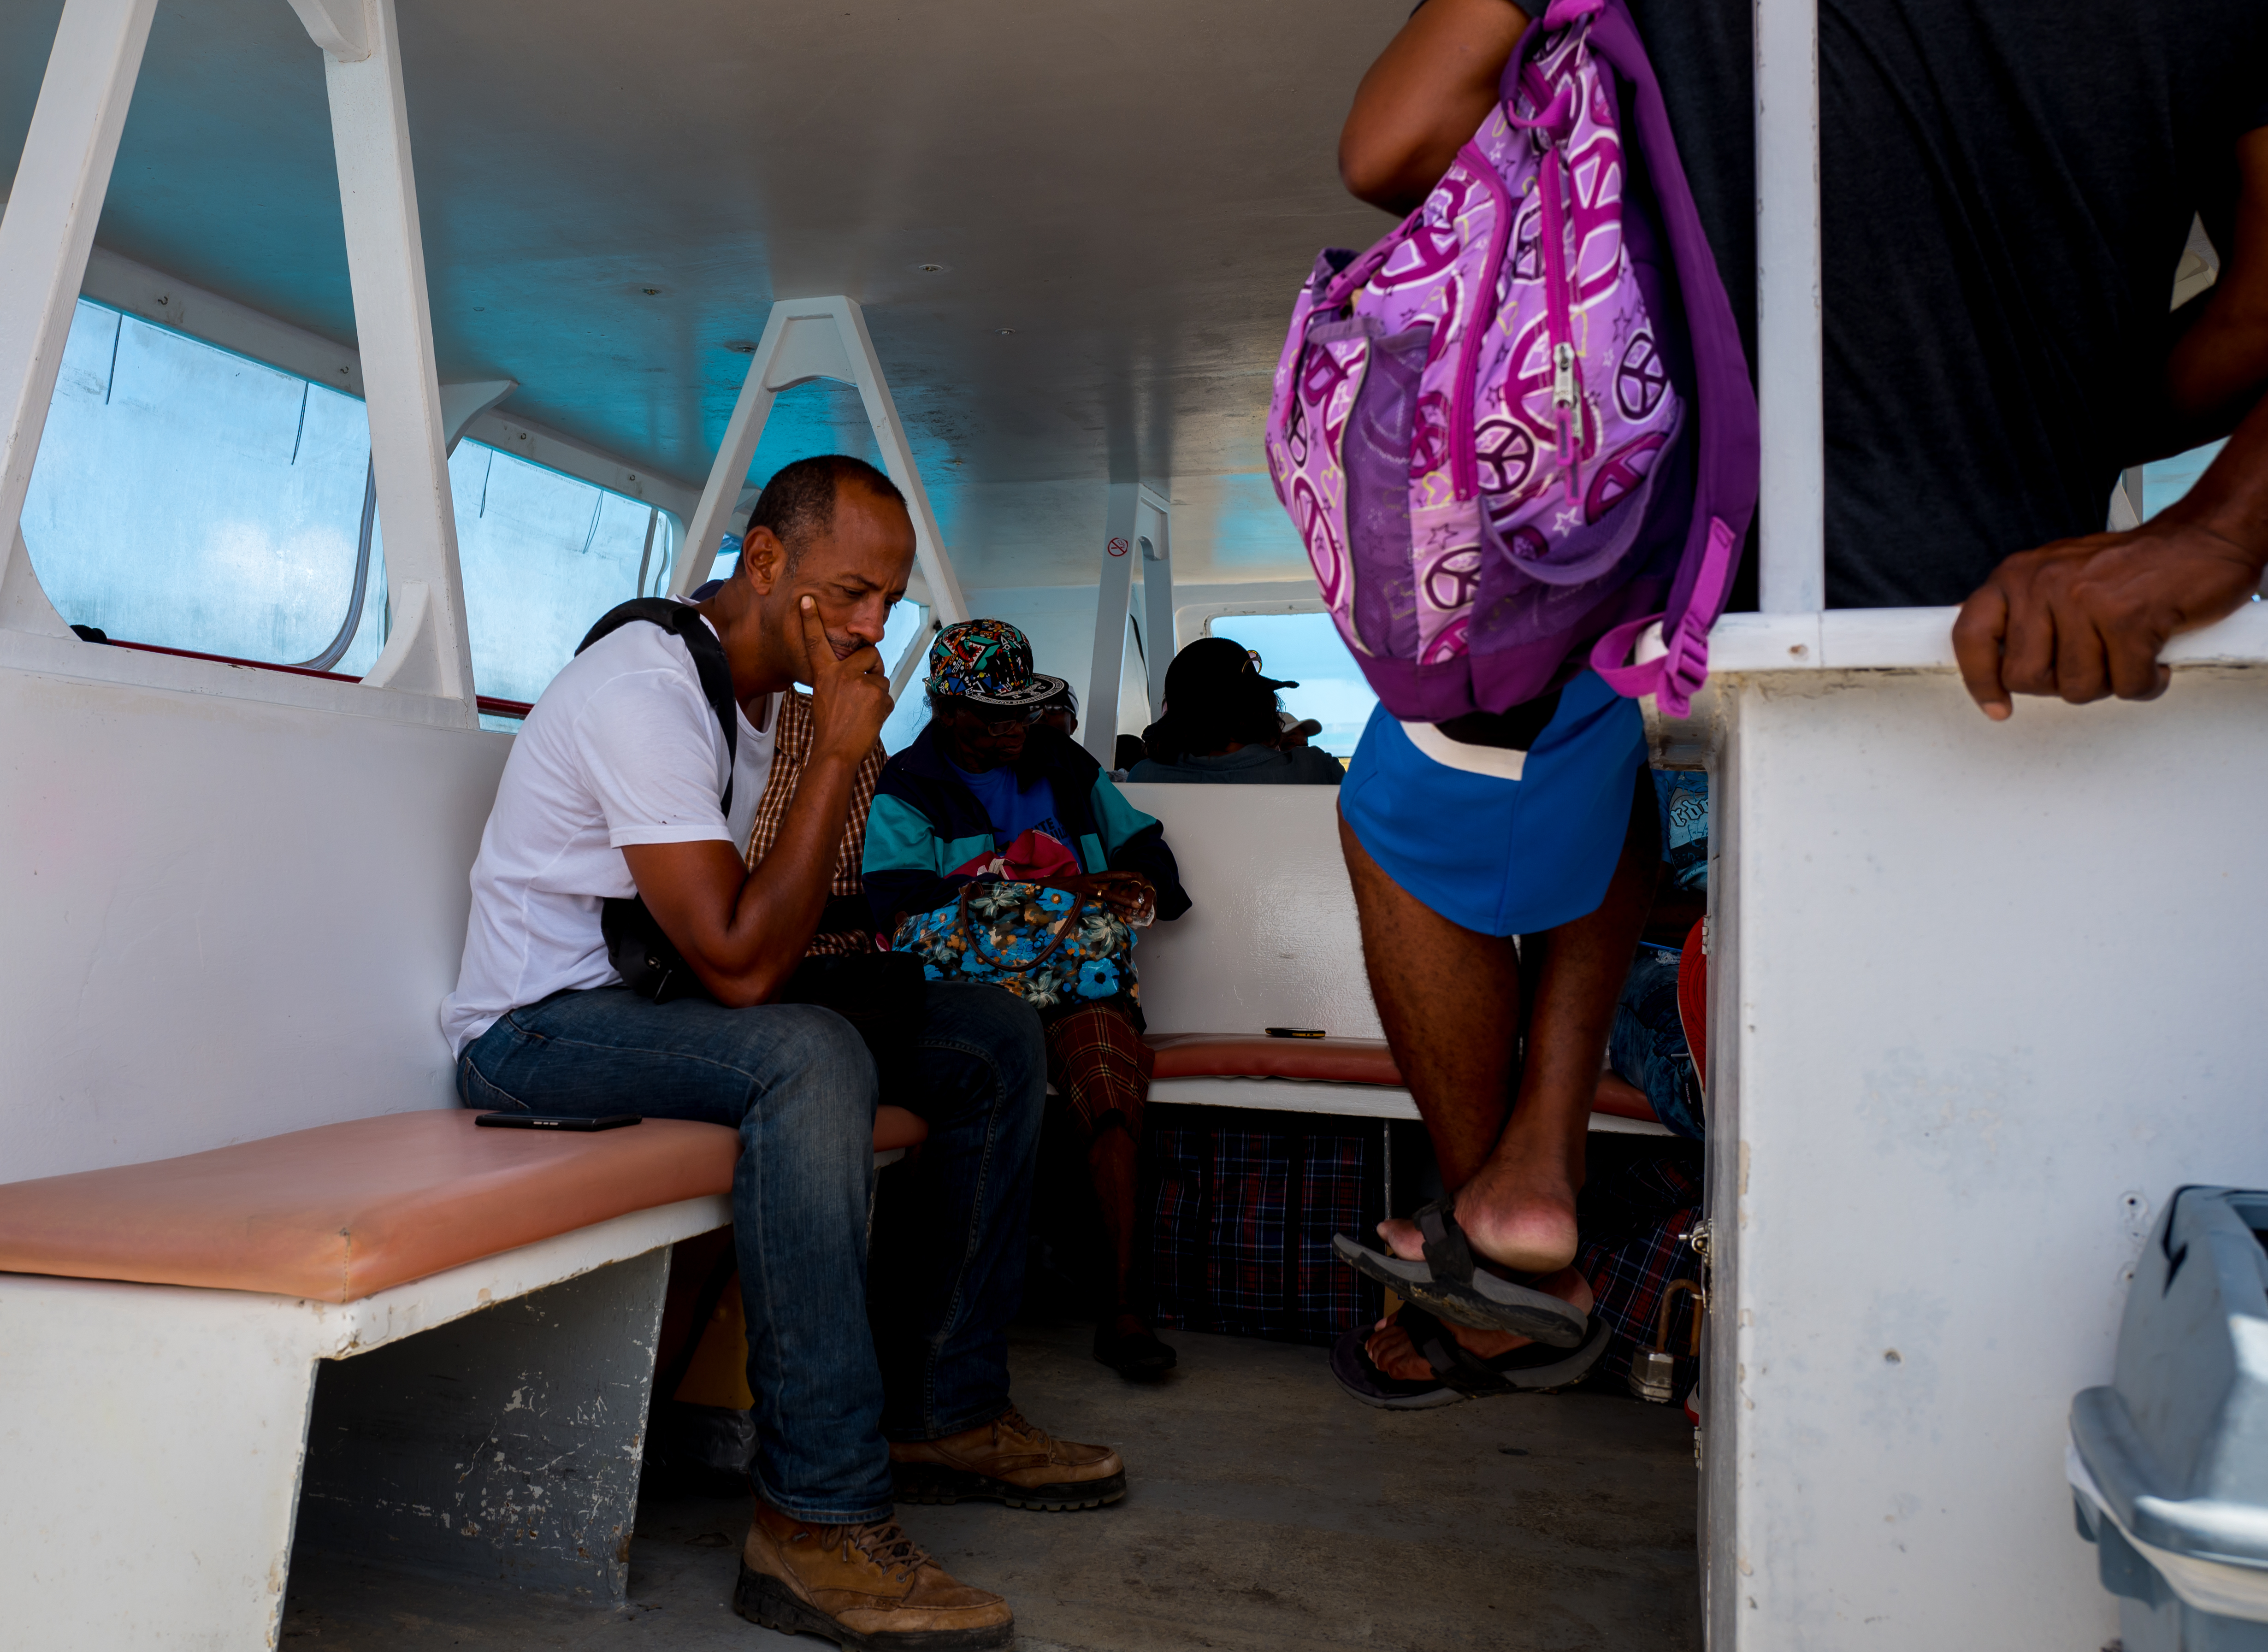 Heading to Barbuda on the Barbuda Express, a high-speed ferry, that makes the 32-mile crossing in almost any weather in about 90 minutes. Some 500 Barbudans have returned to the island since the government in Antigua lifted the mandatory evacuation order in late September 2017.